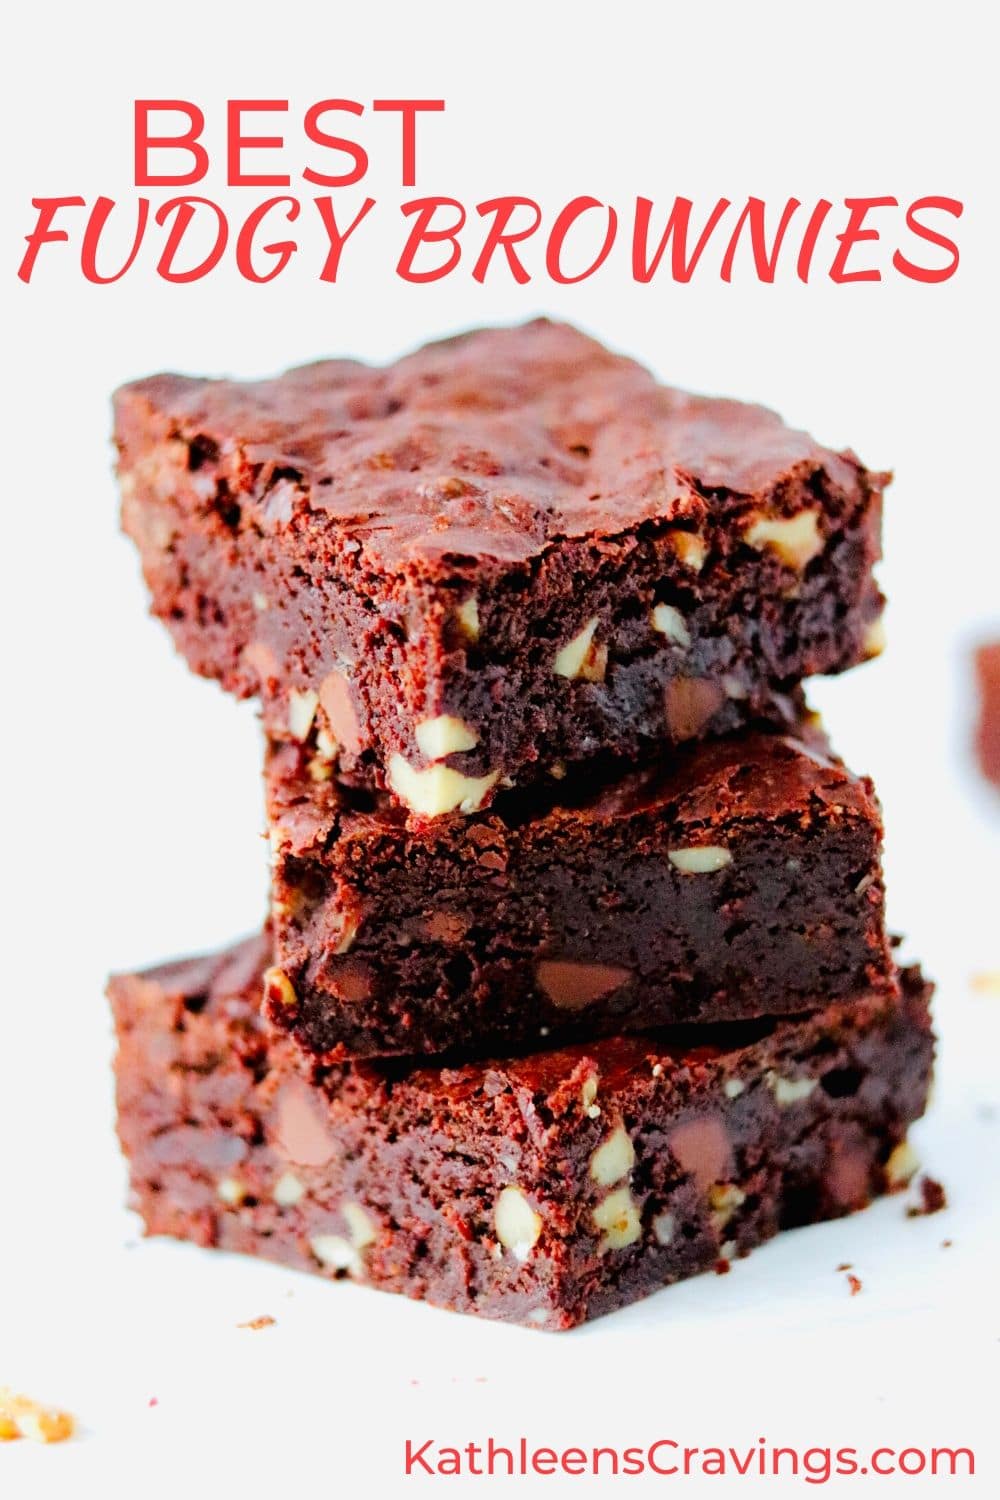 Best Fudgy Brownies with text